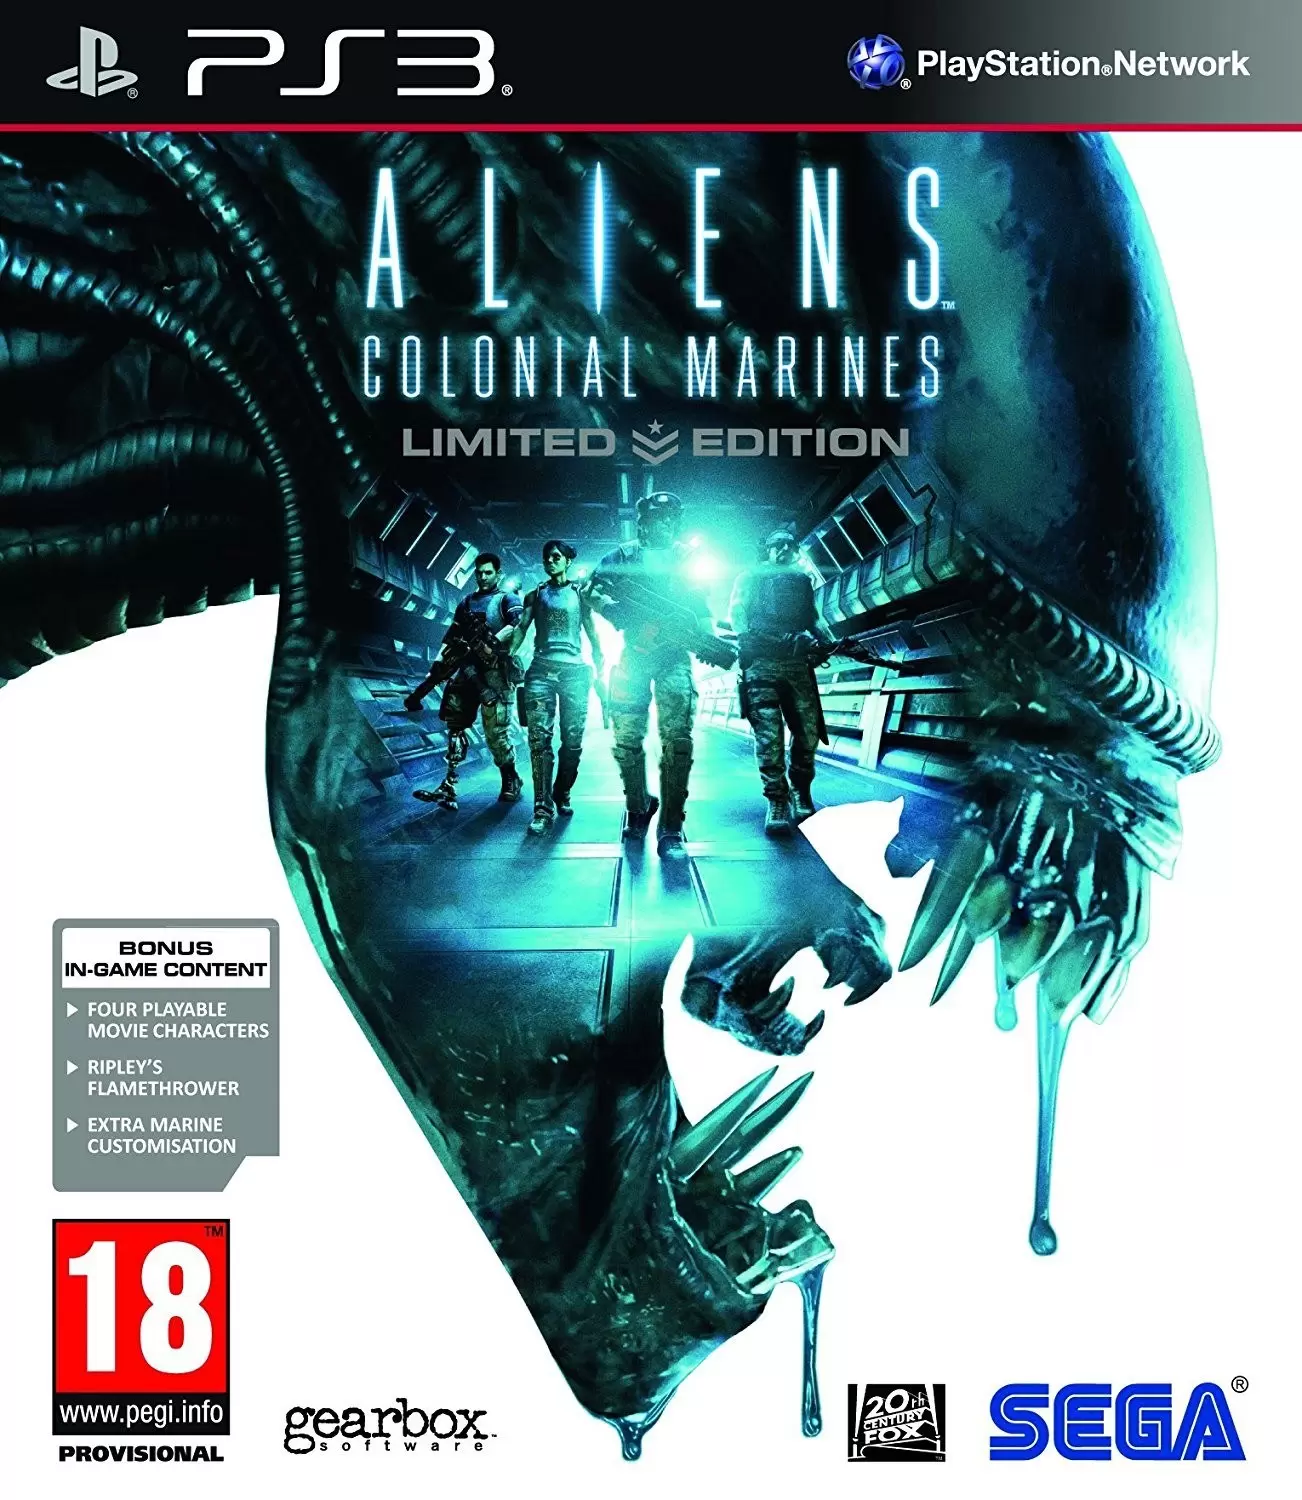 PS3 Games - Aliens: Colonial Marines - Limited Edition